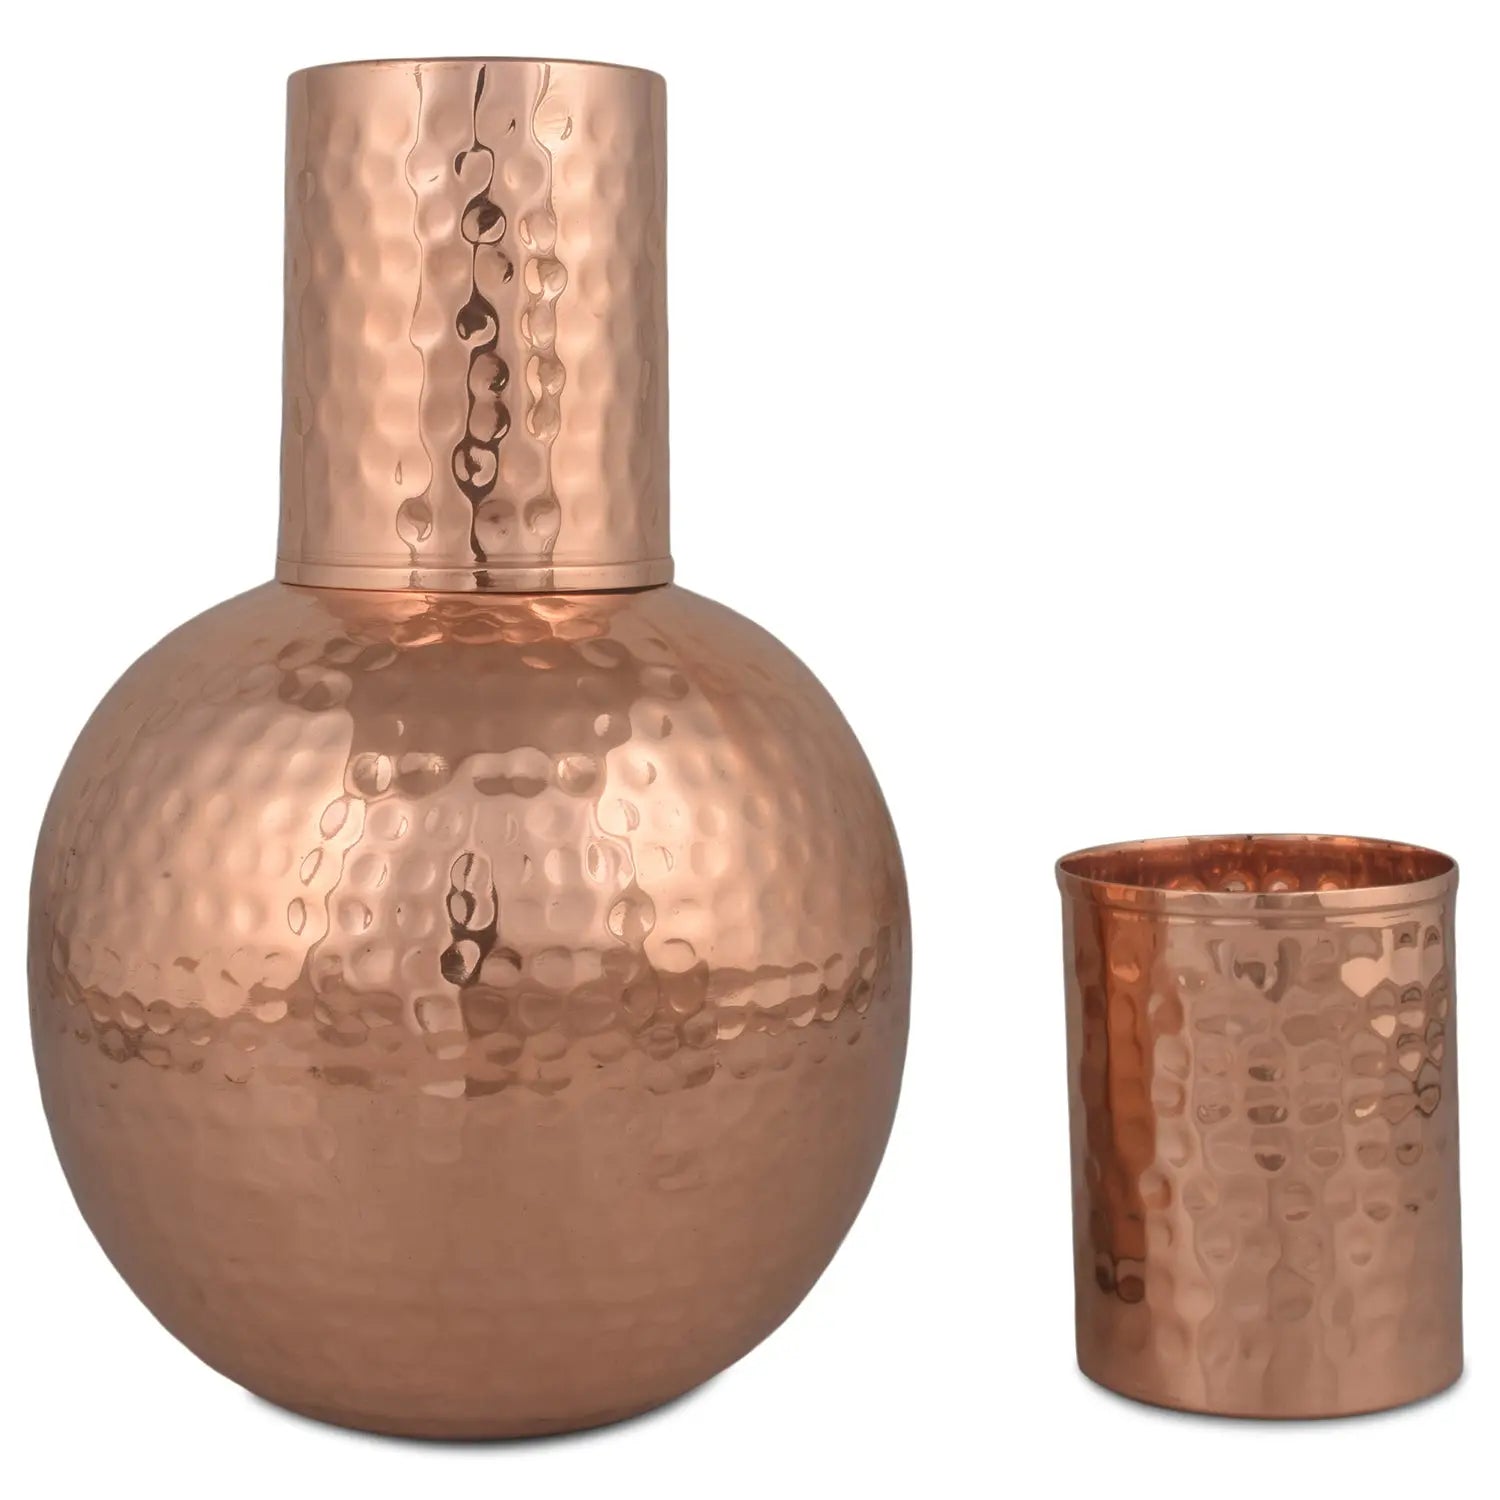 Crockery Wala And Company Copper Hammered Surai Glass With Brass Stand Water Pitcher Jar With Glass Lid 600 ML - CROCKERY WALA AND COMPANY 